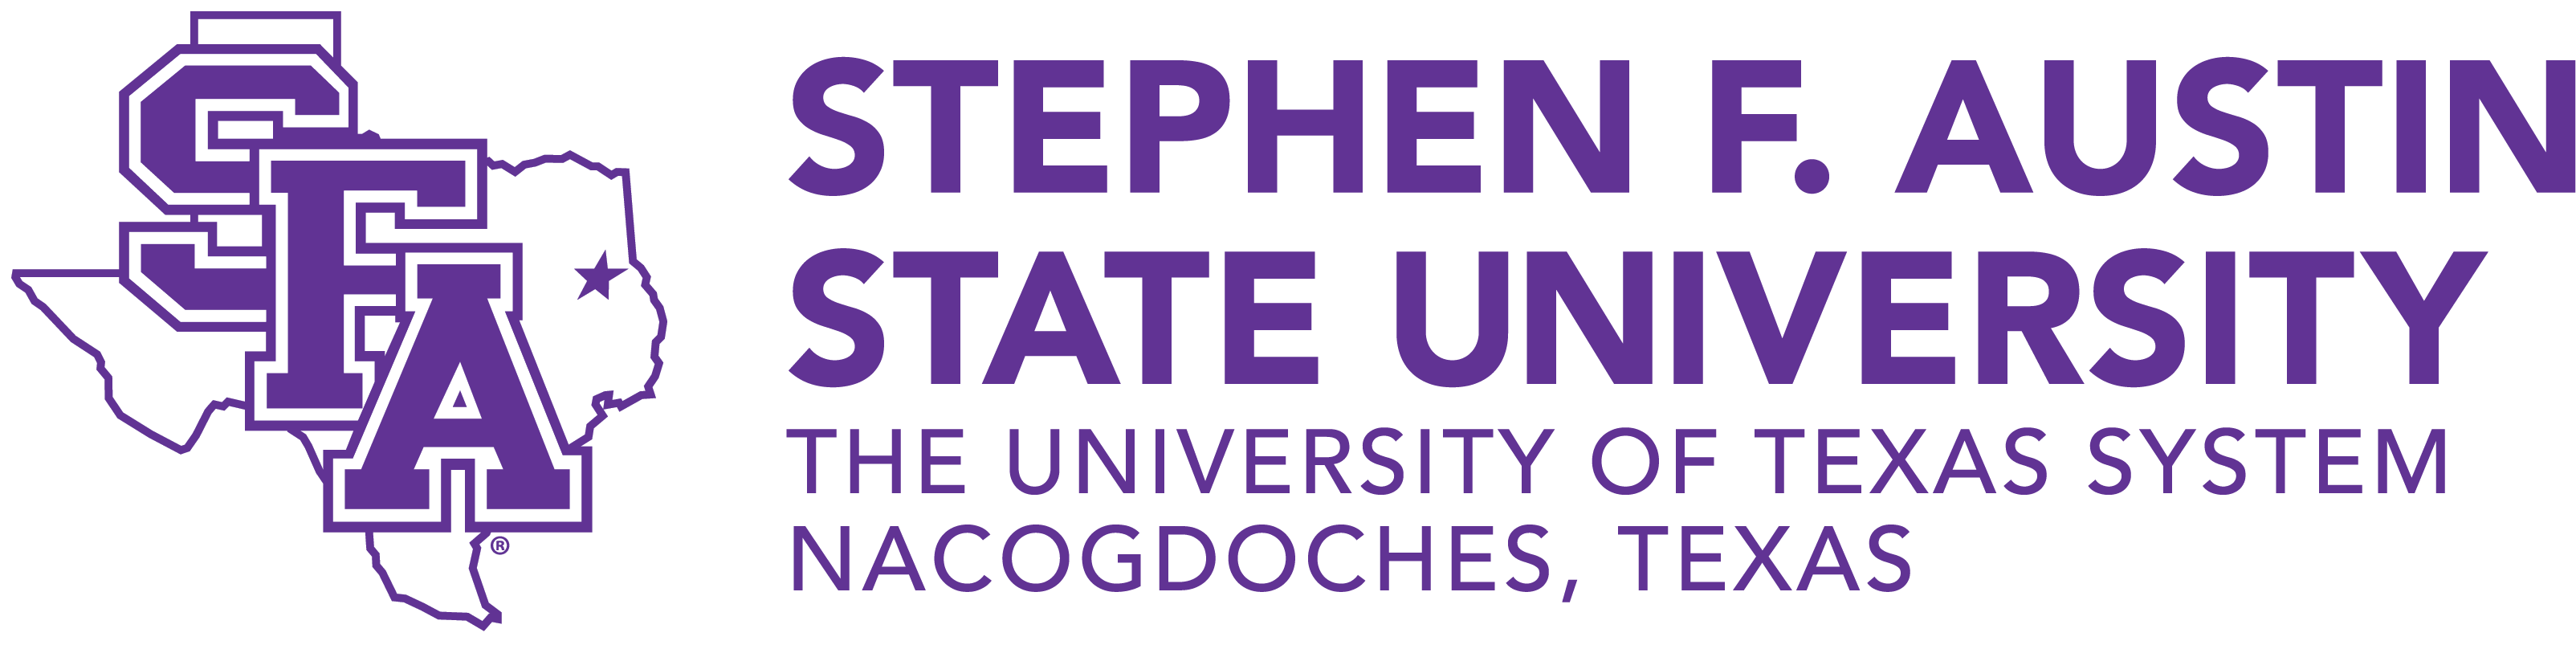 Campus banners commemorate SFA centennial, Gallery